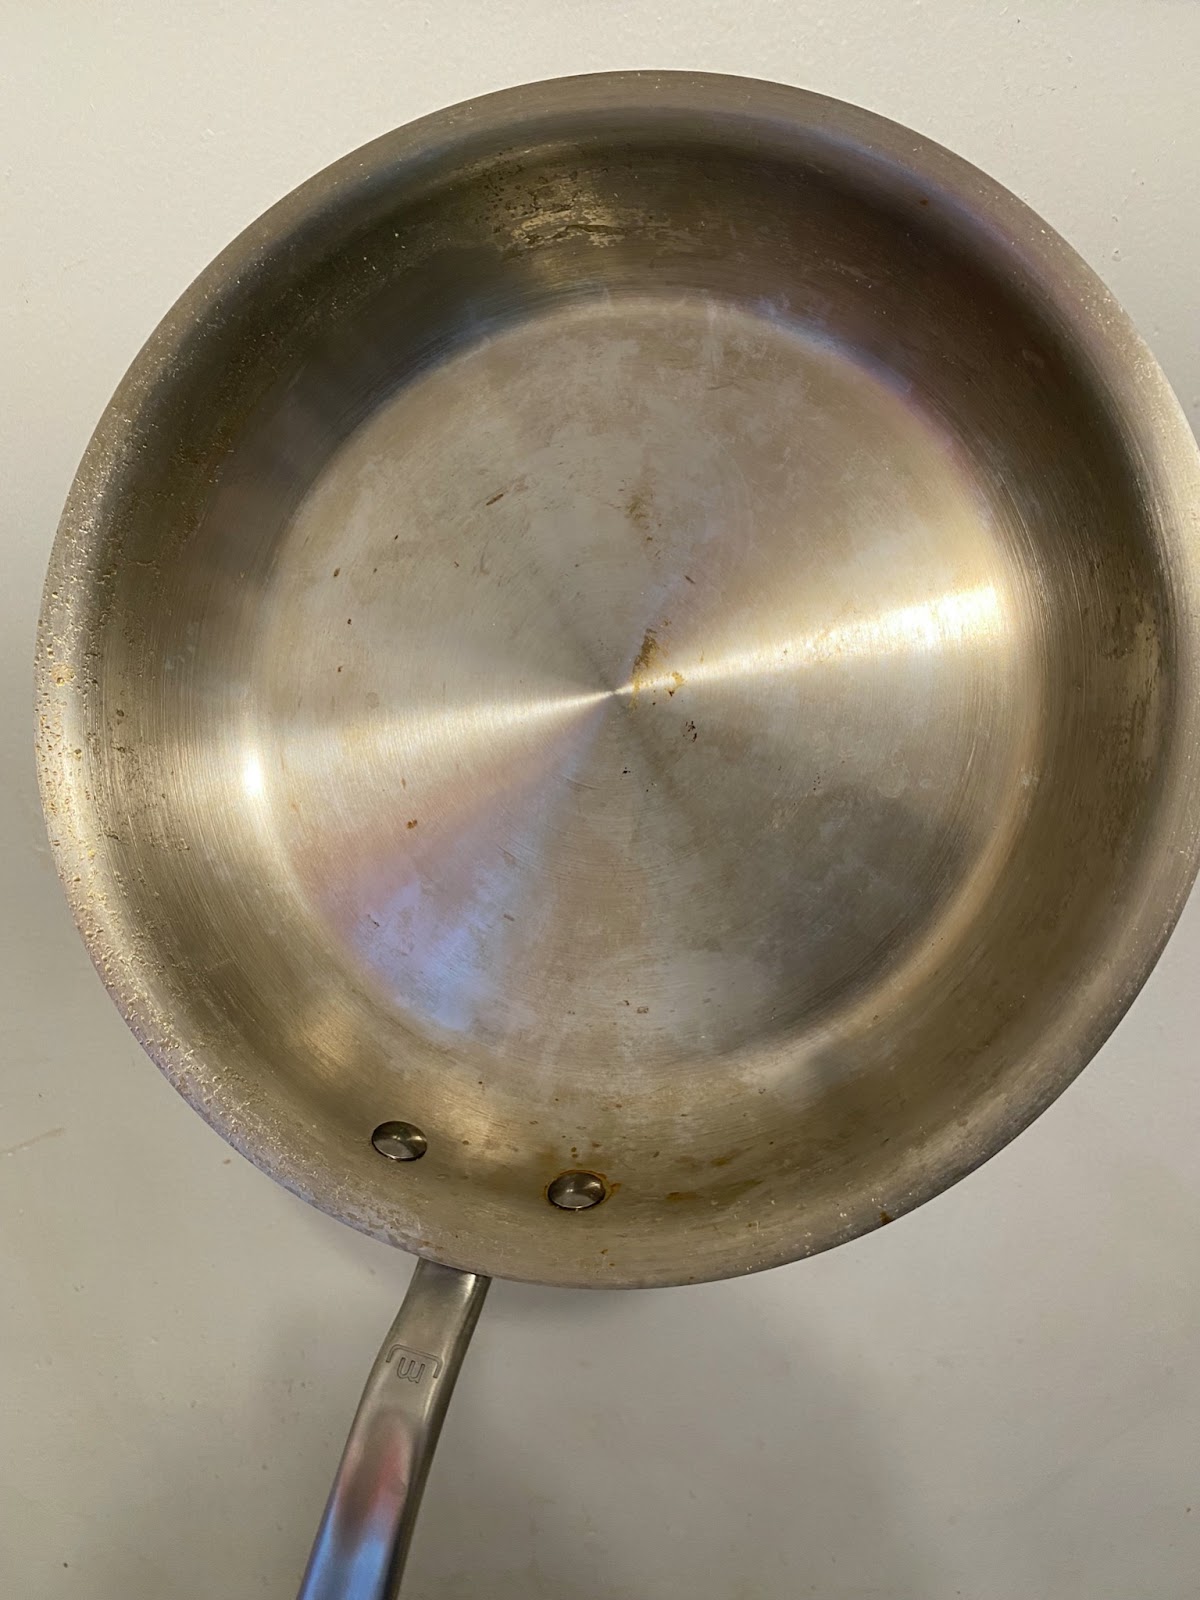 made in stainless steel pan after use